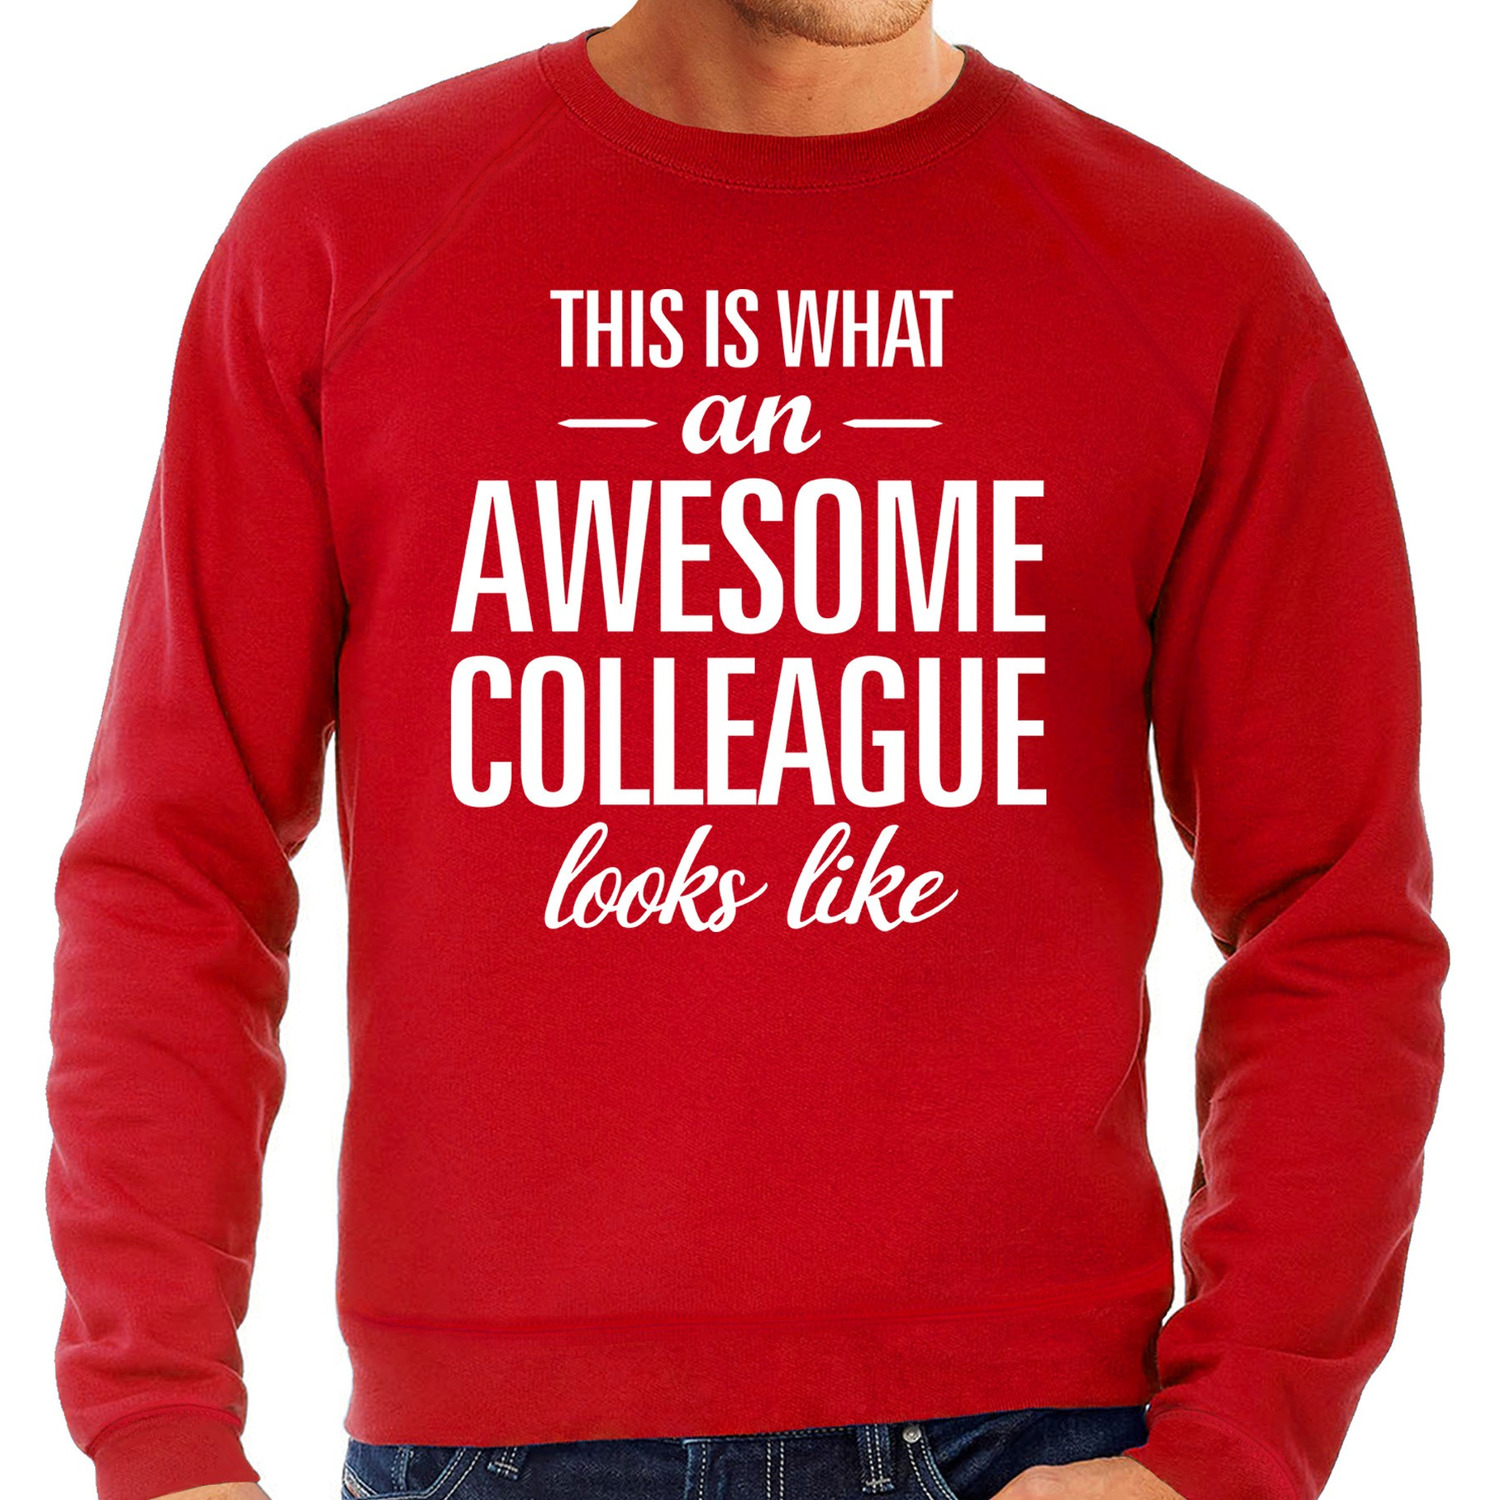 Awesome colleague-collega cadeau sweater rood heren